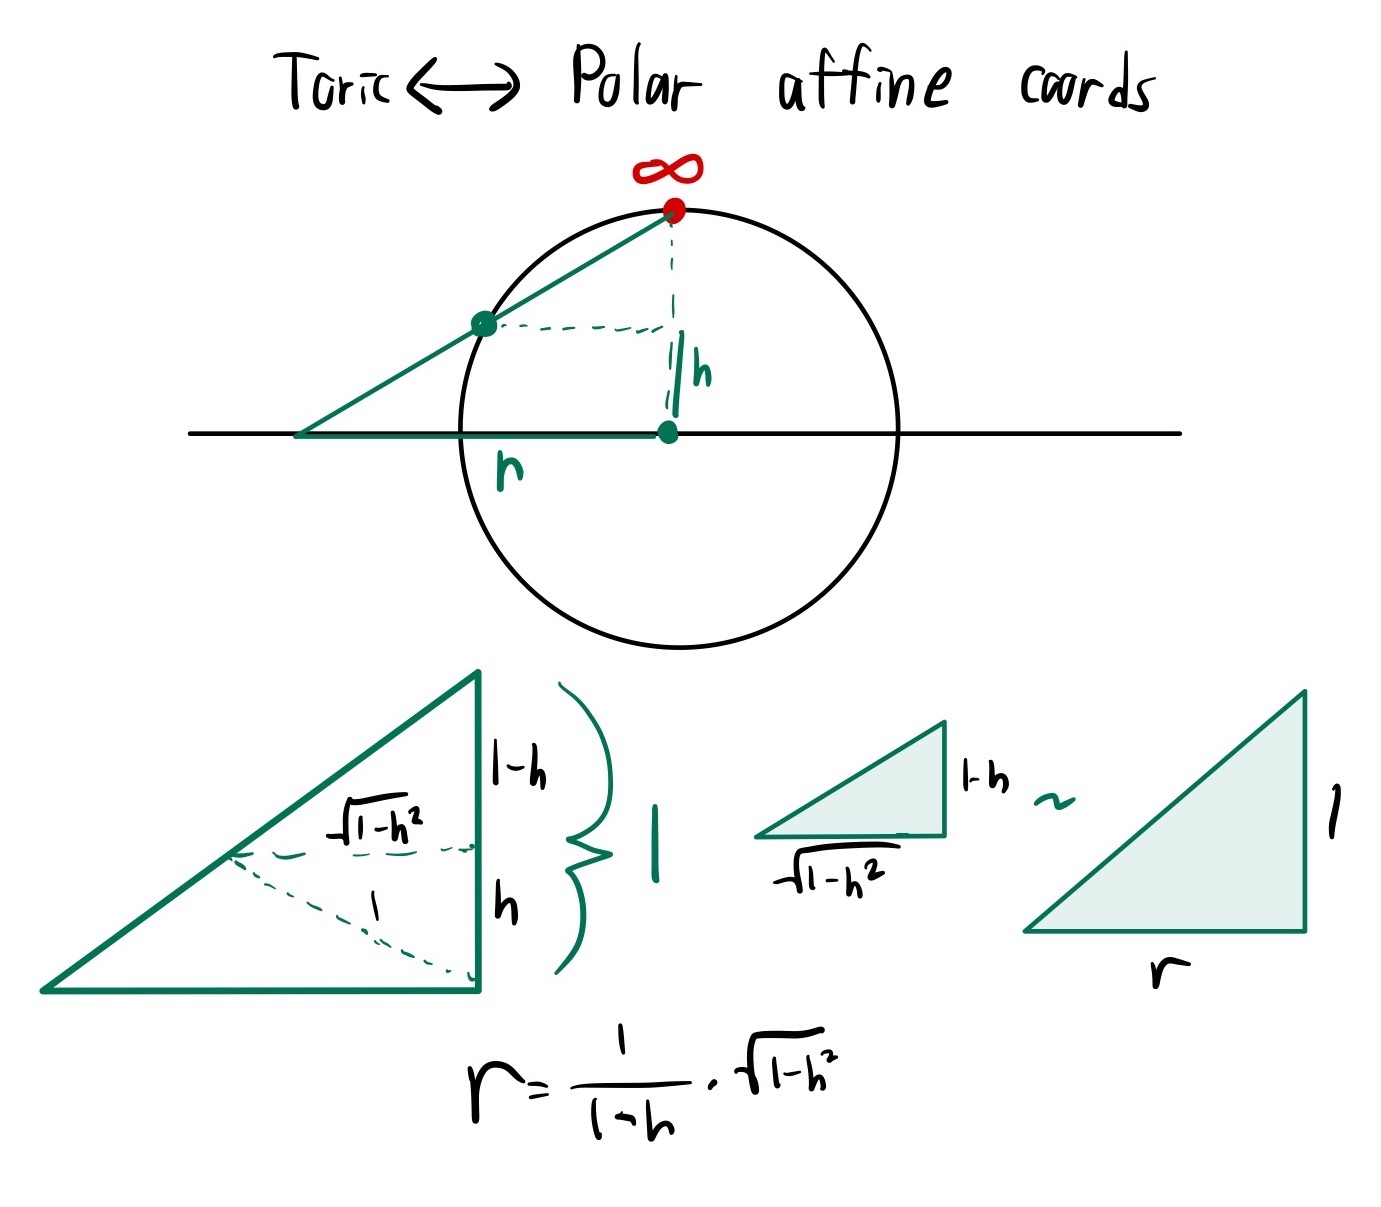  diagram showing the map from toric coordinates to affine coordinates, under sterographic projection